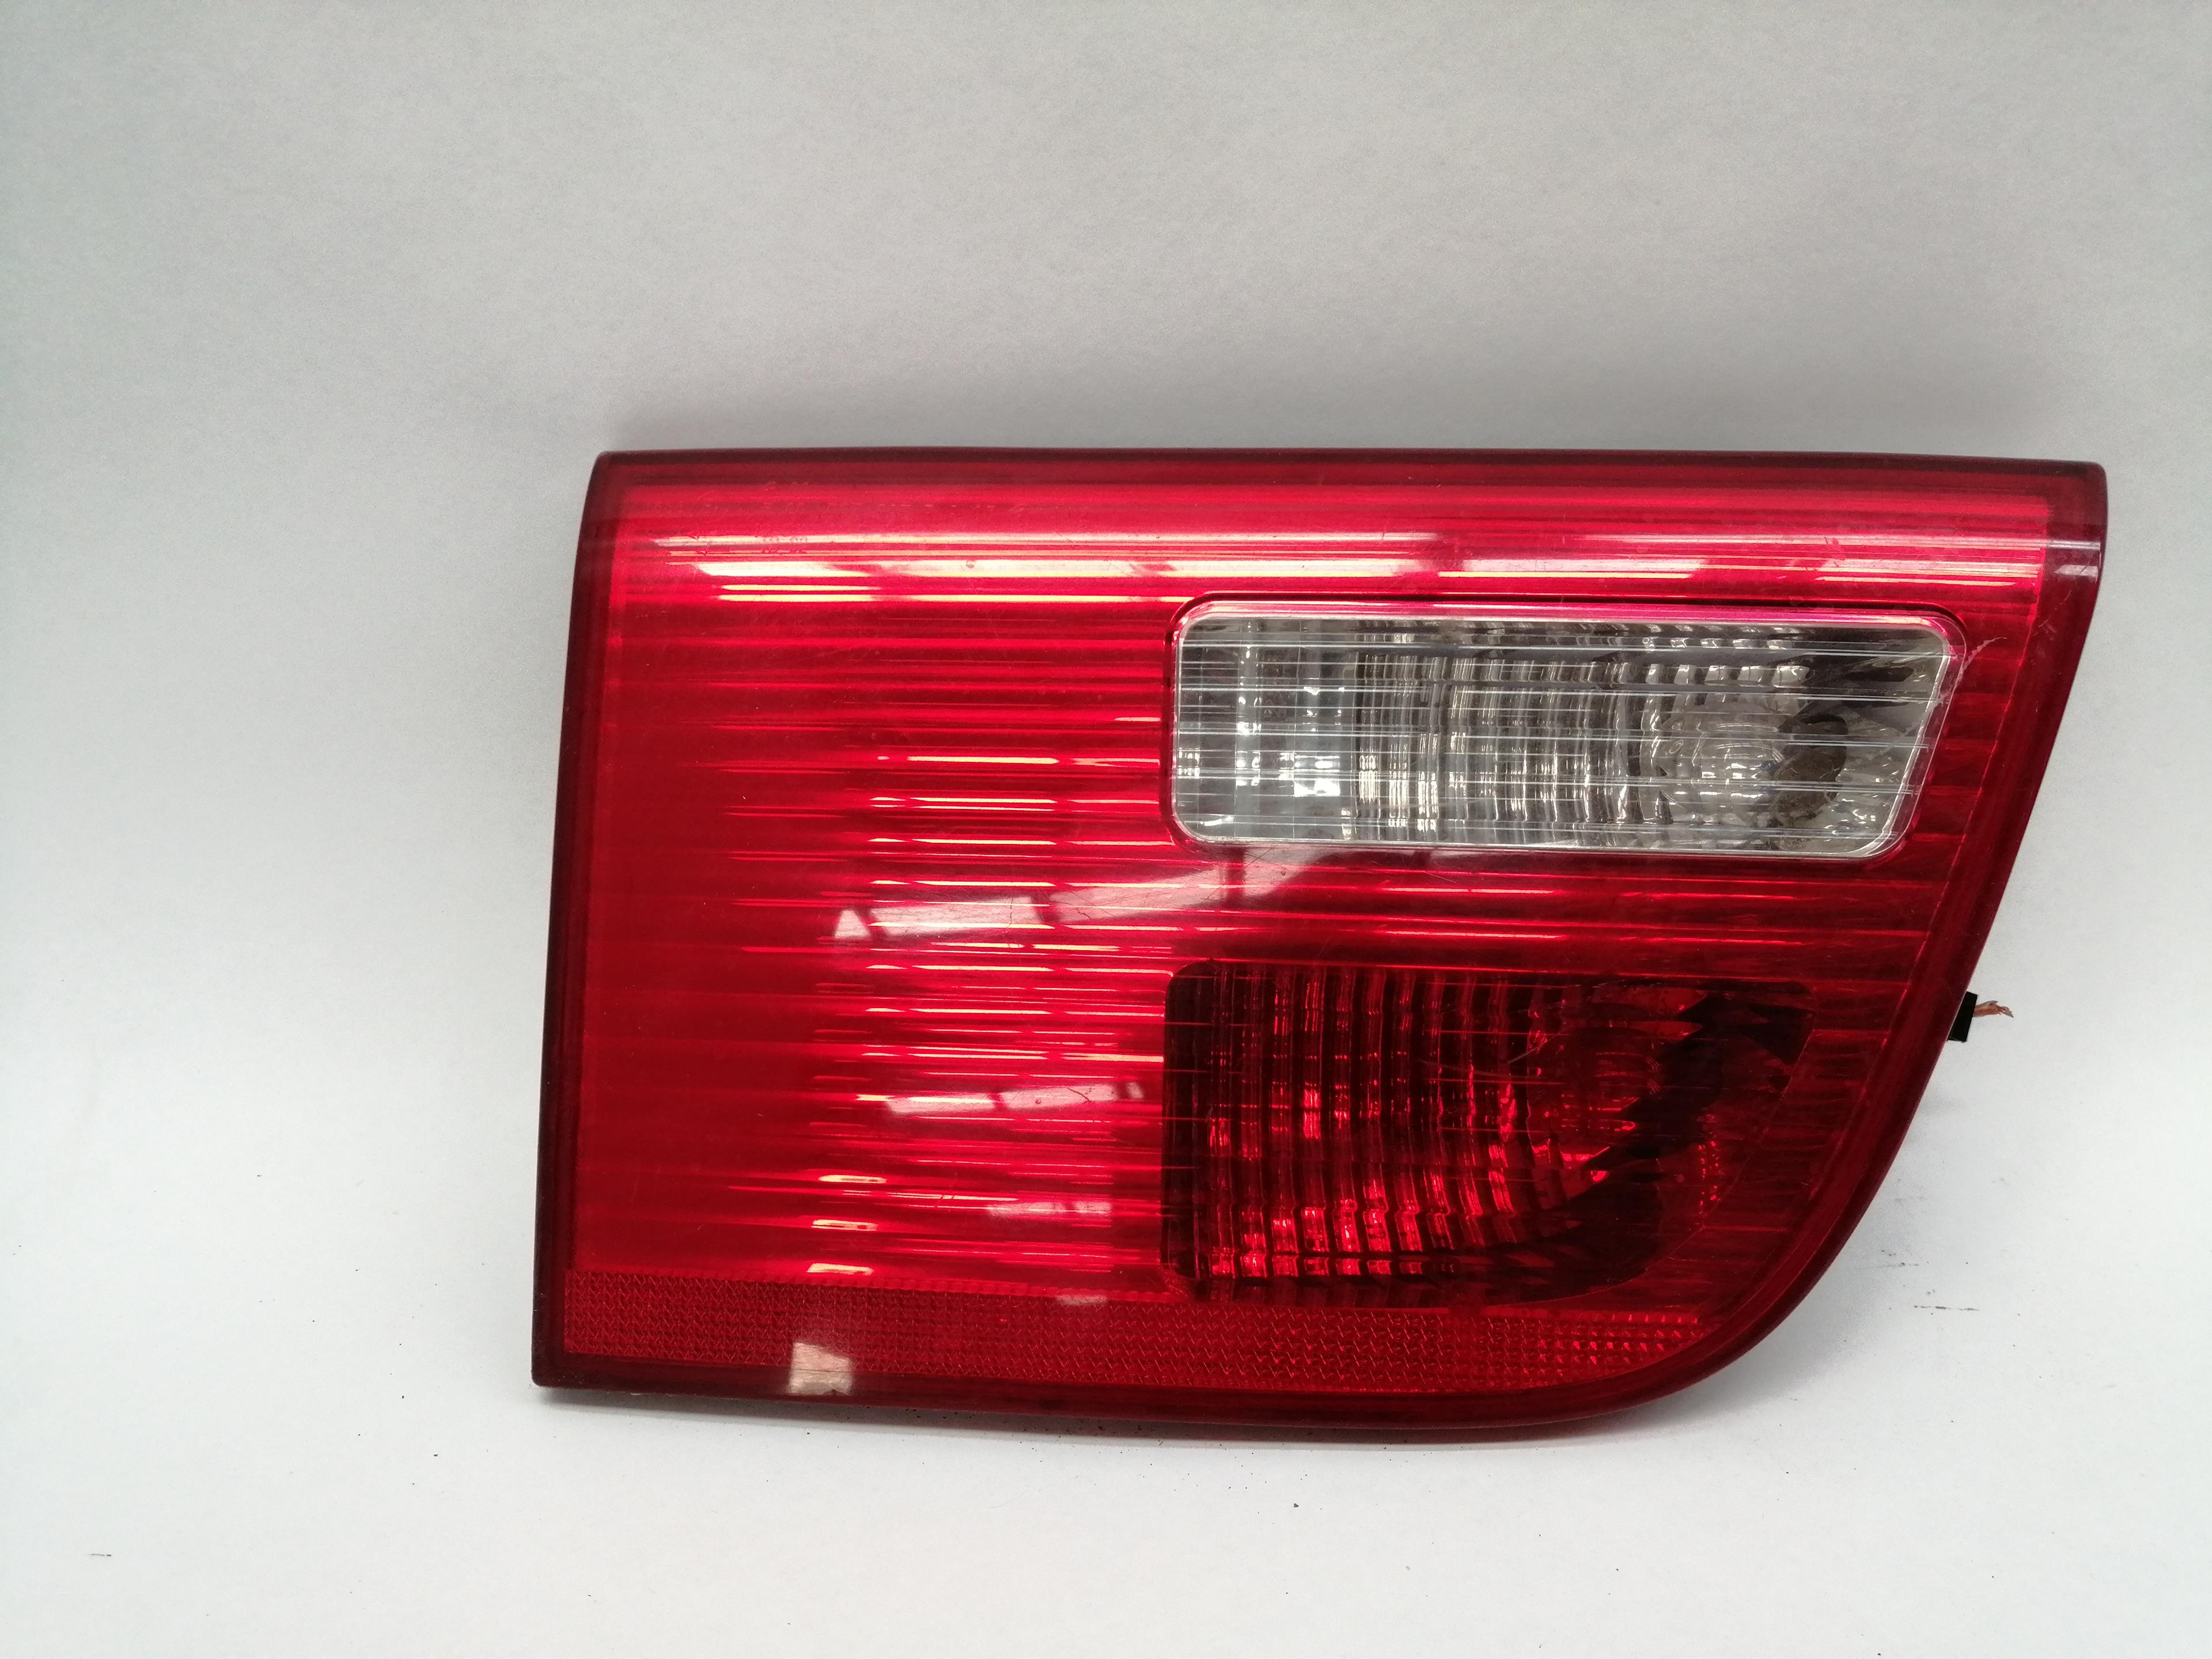 FORD X5 E53 (1999-2006) Rear Left Taillight 63217164485 25348500